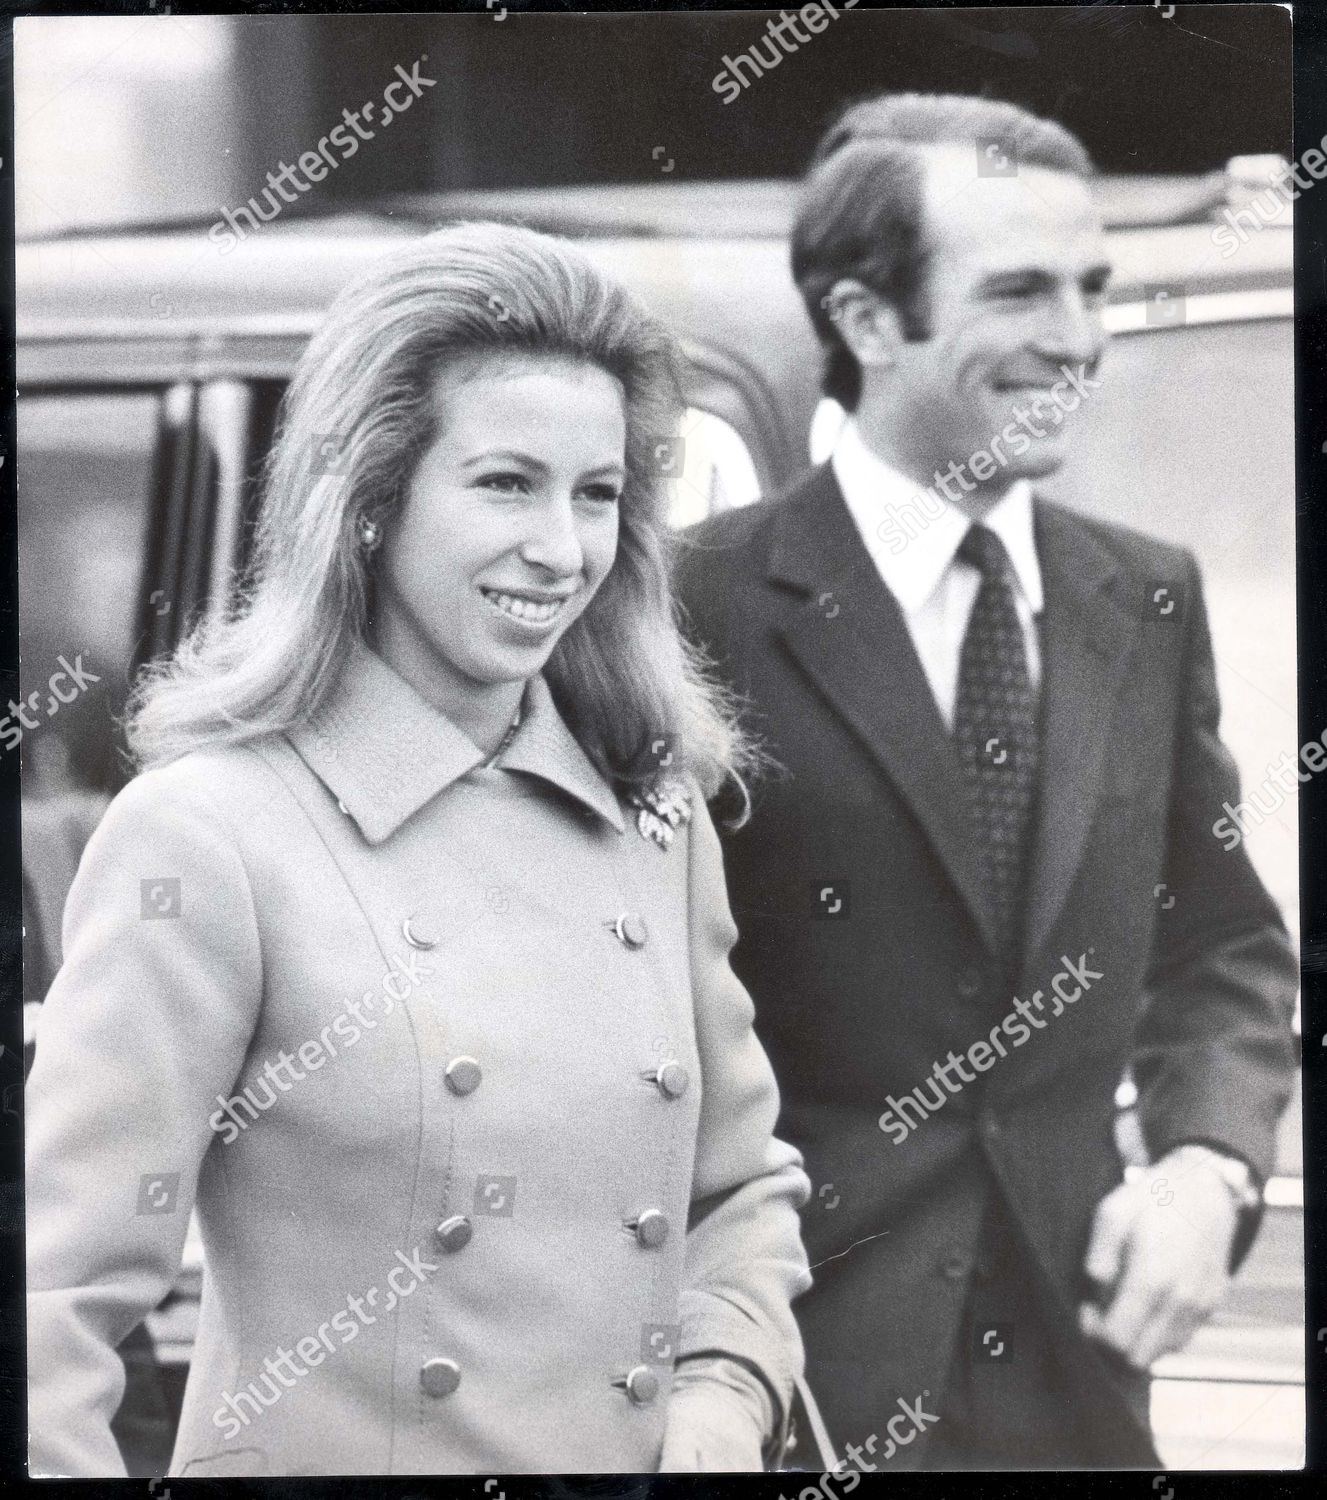 princess-anne-princess-royal-and-captain-mark-phillips-at-lap-en-route-to-west-indies-for-their-honeymoon-in-1973-shutterstock-editorial-1079278a.jpg